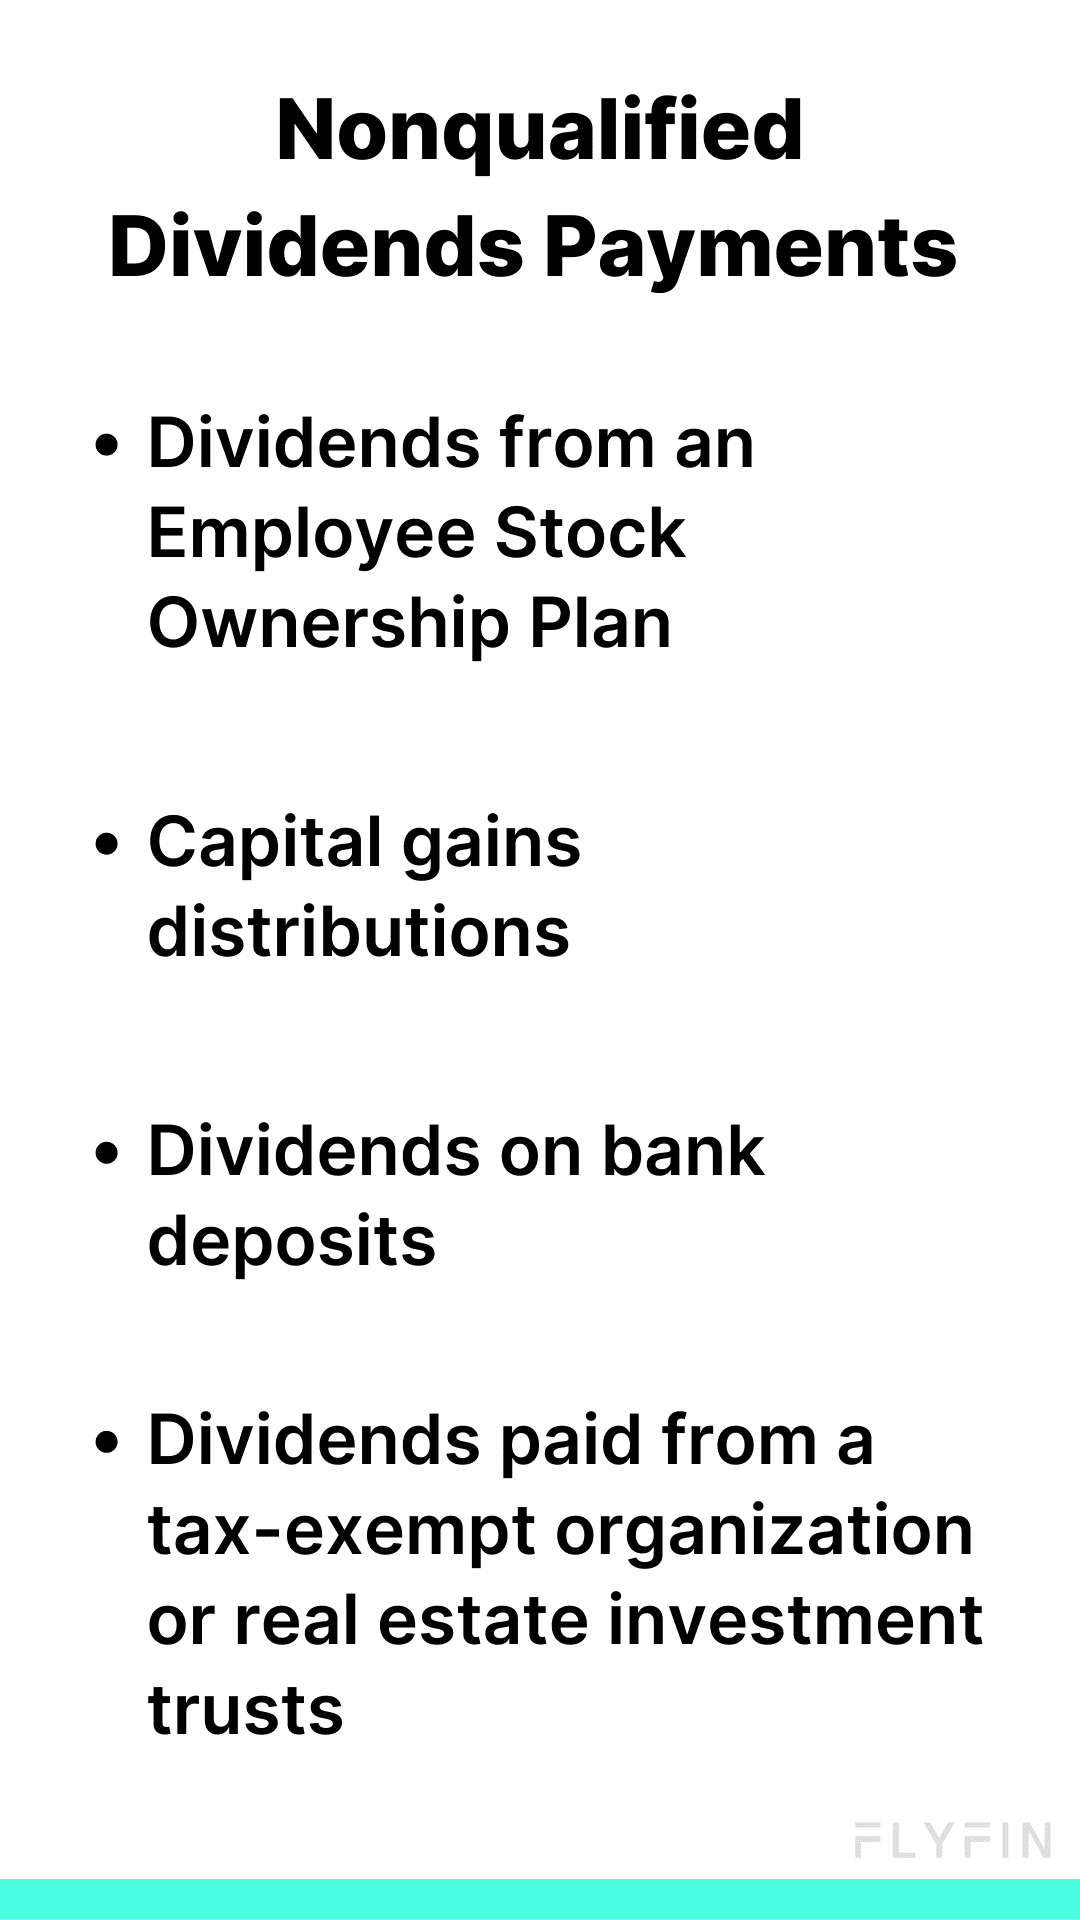 Image listing types of nonqualified dividends including ESOP dividends, capital gains distributions, tax-exempt org dividends, and bank deposit dividends. No mention of self-employed, 1099, freelancer, or taxes.